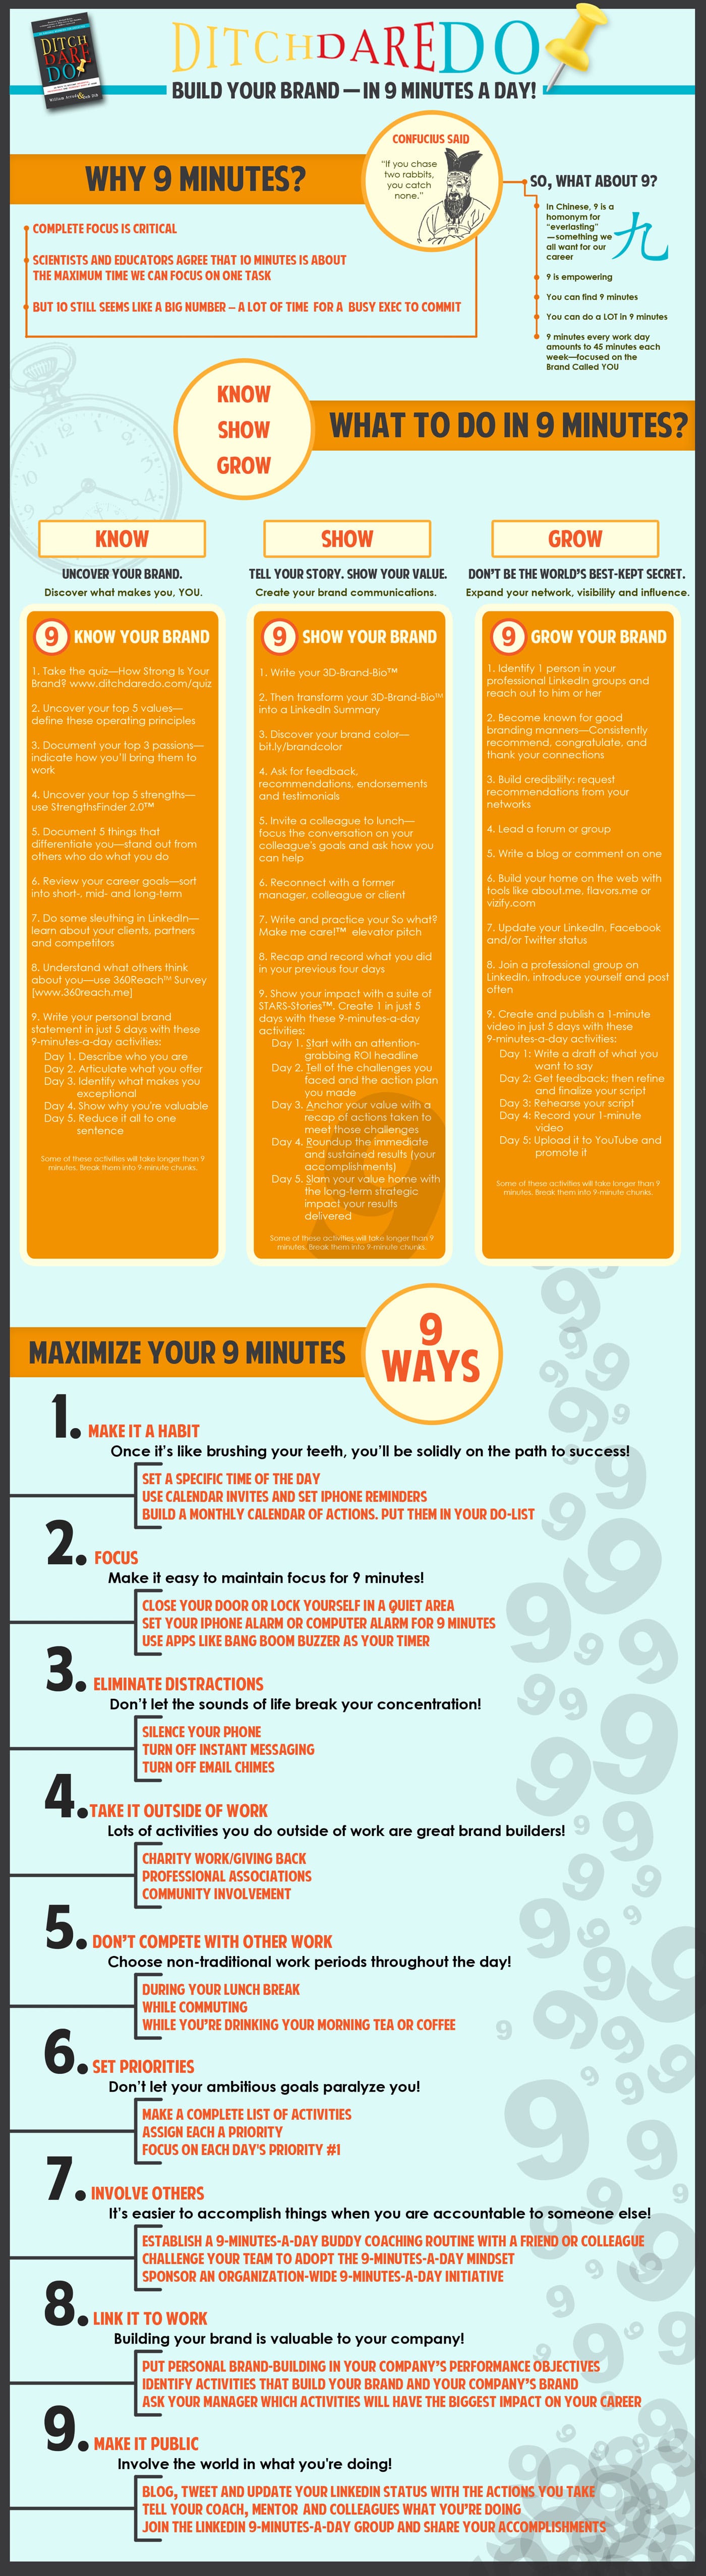 How To Build Your Personal Brand In 9 Minutes Each Day [Infographic]